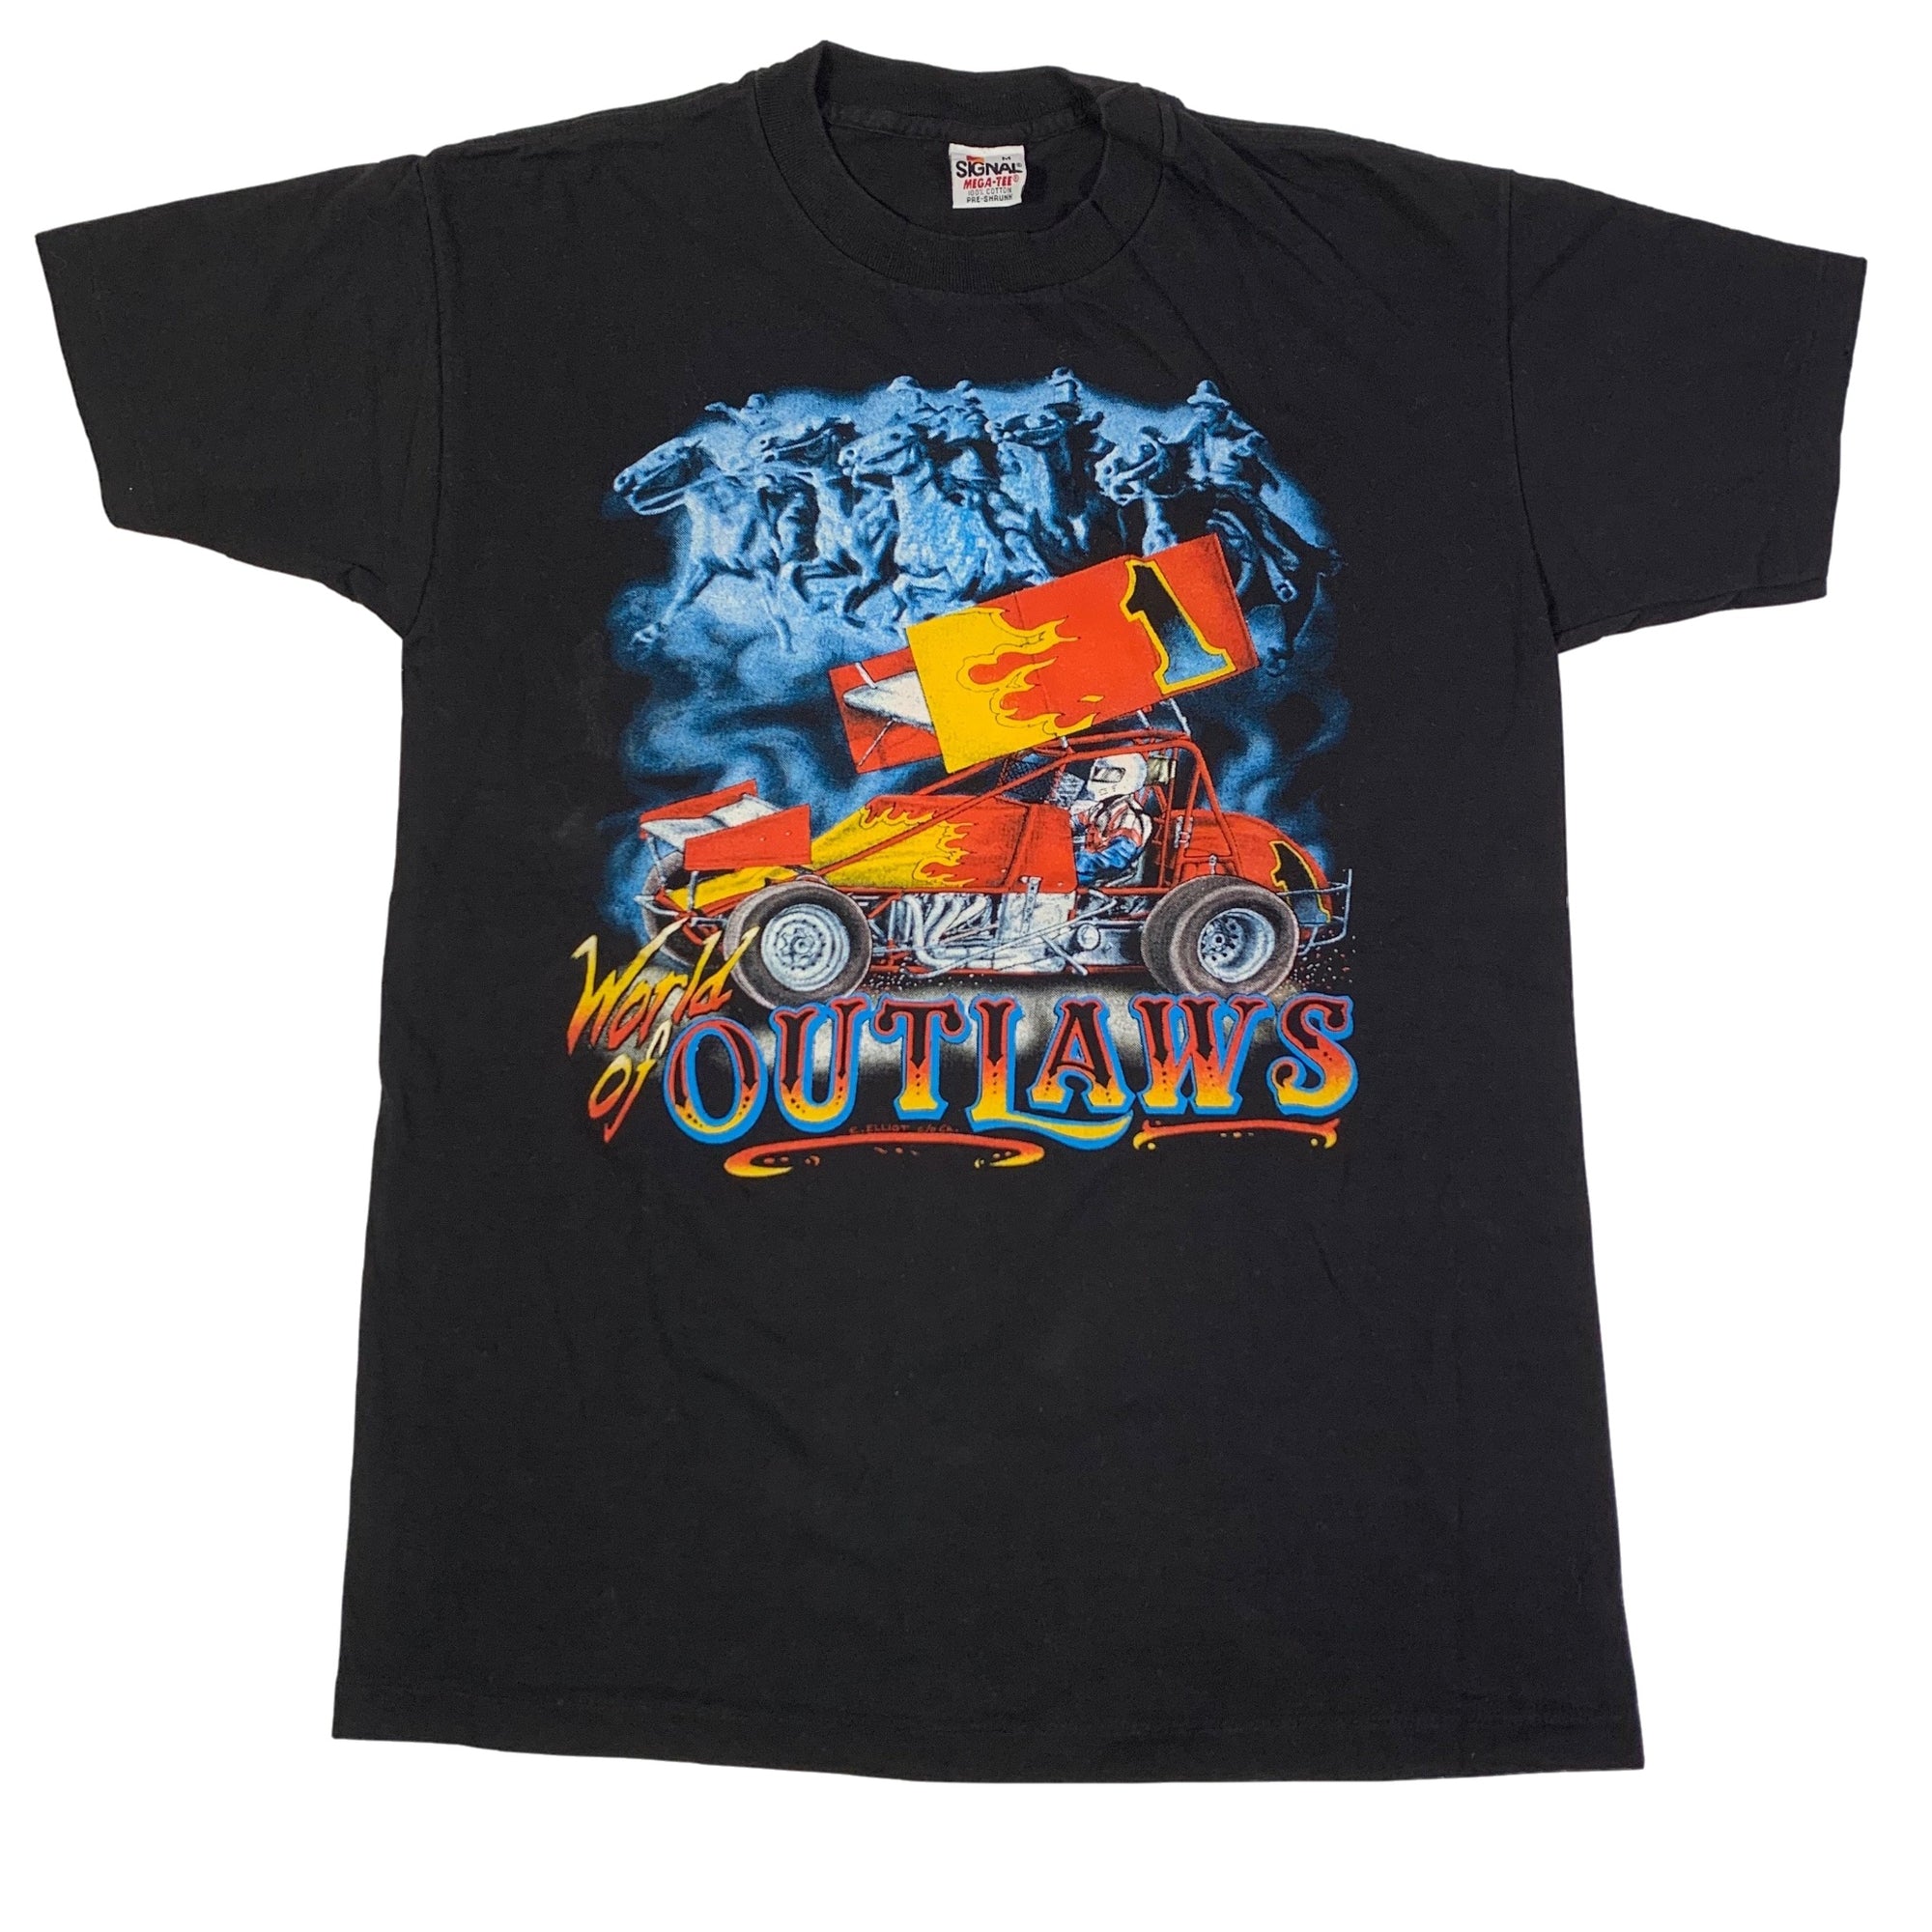 Vintage World Of Outlaws "1990" T-Shirt - jointcustodydc